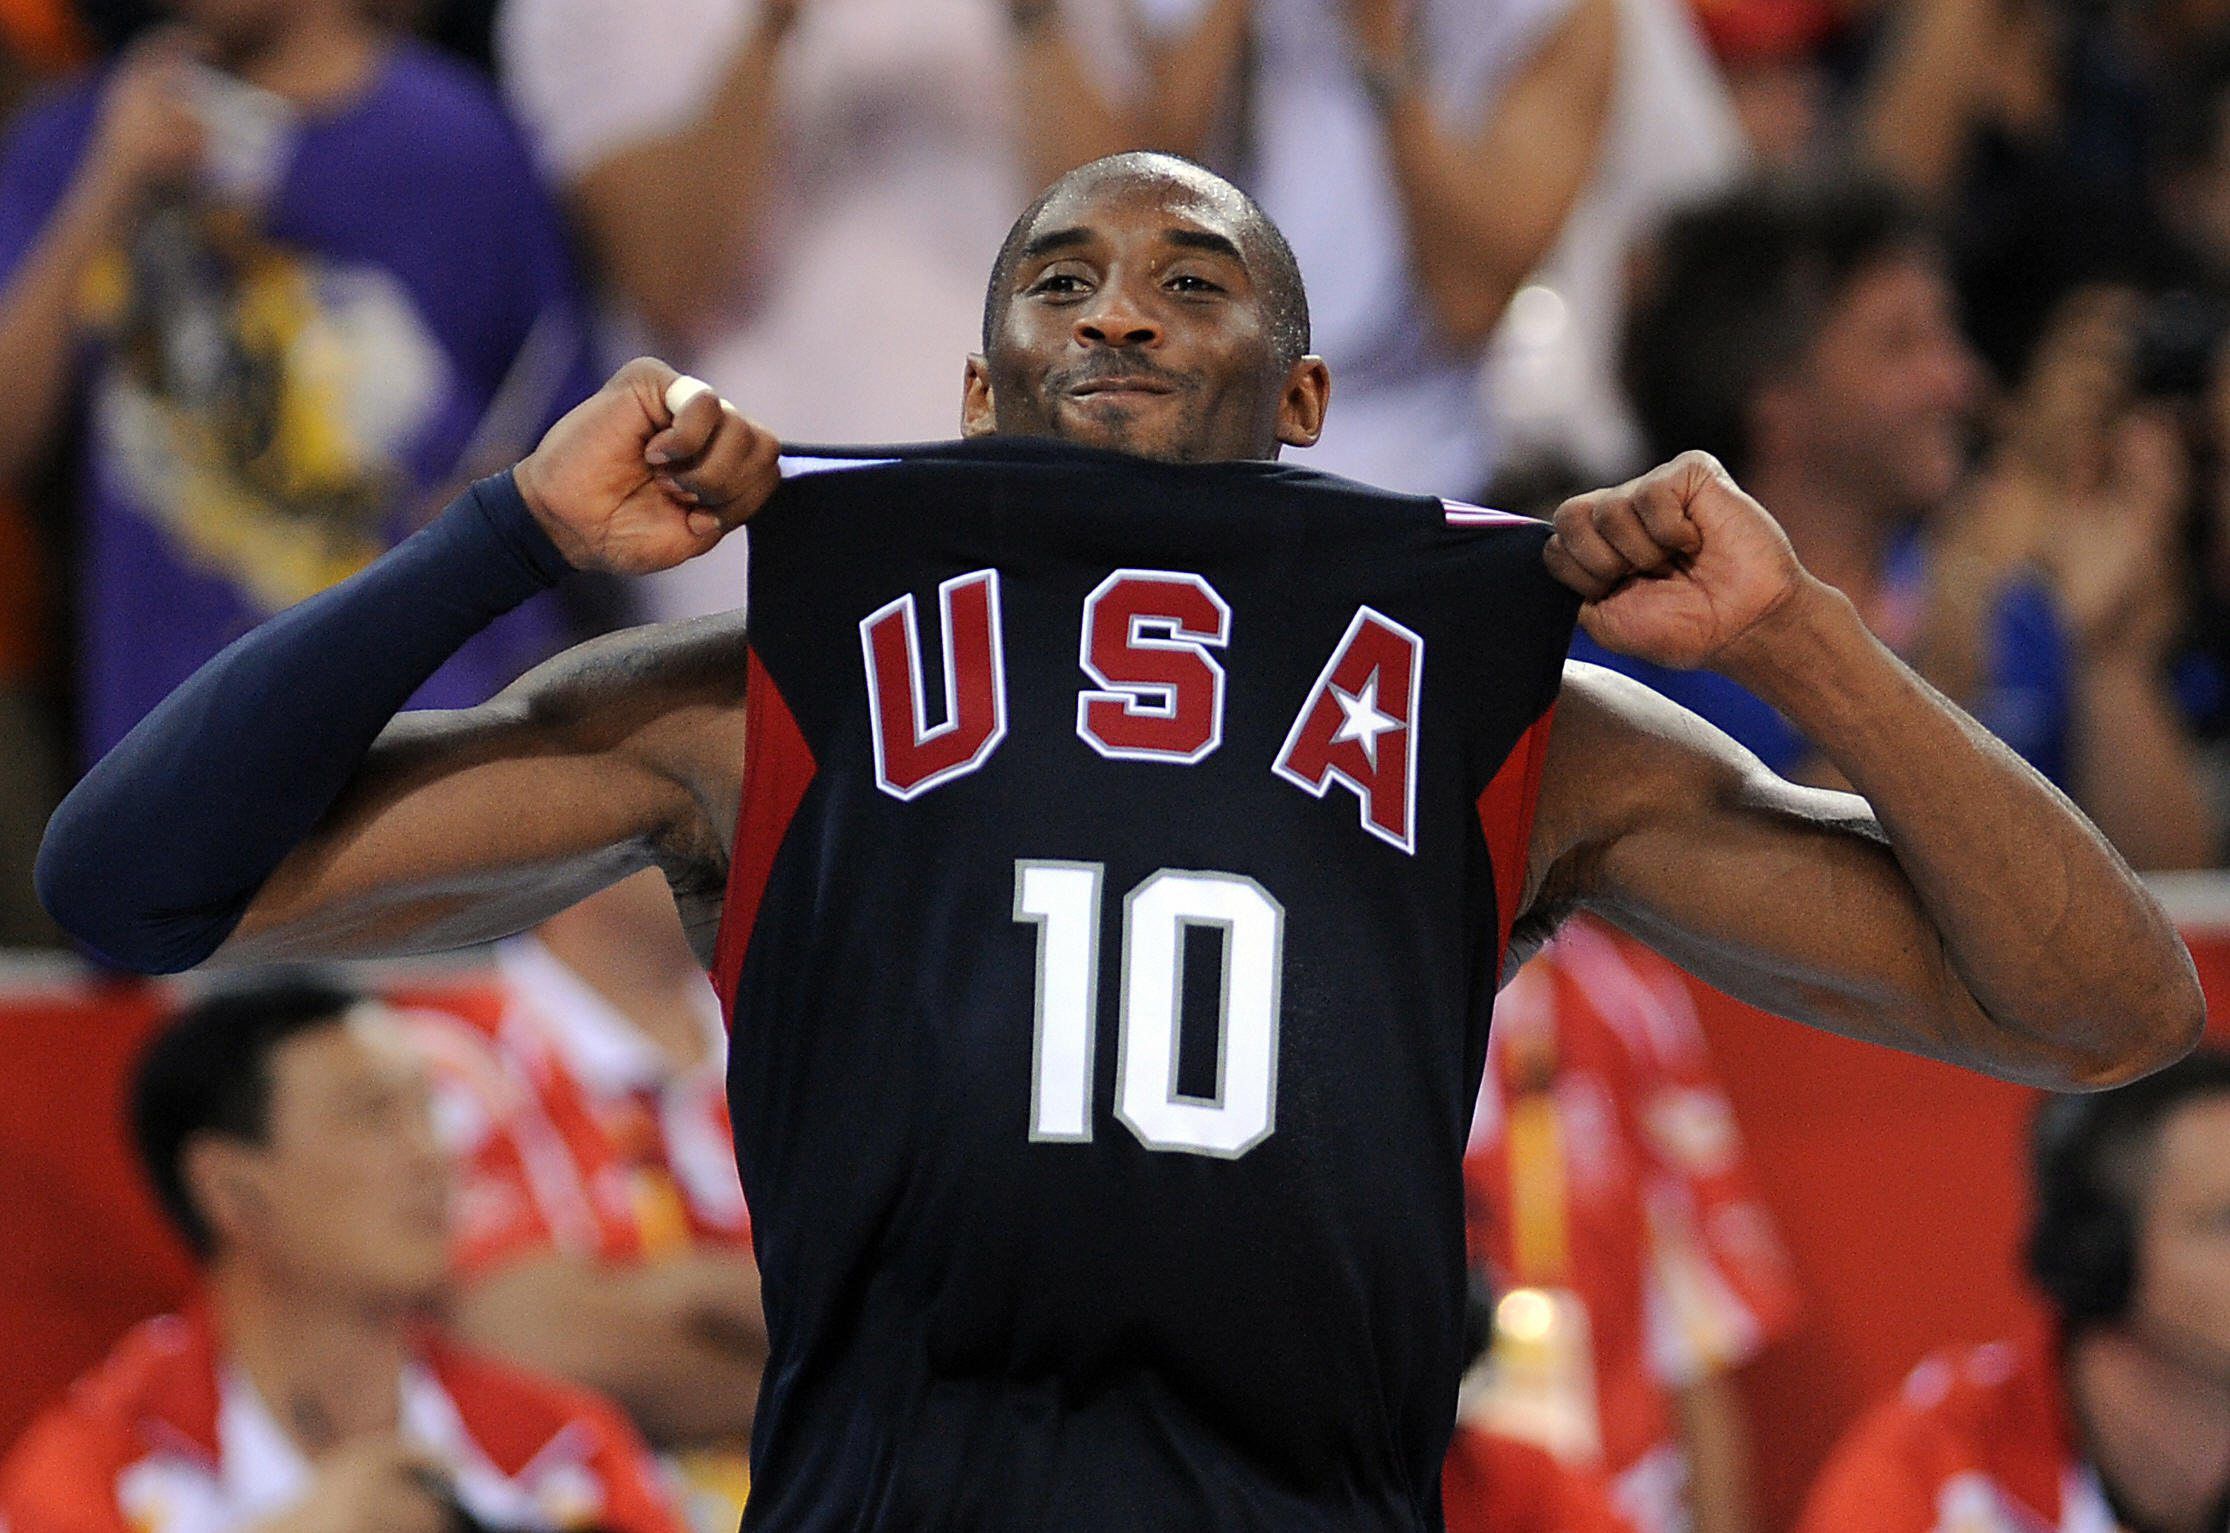 Kobe Bryant's Hall of Fame legacy includes his Olympic excellence